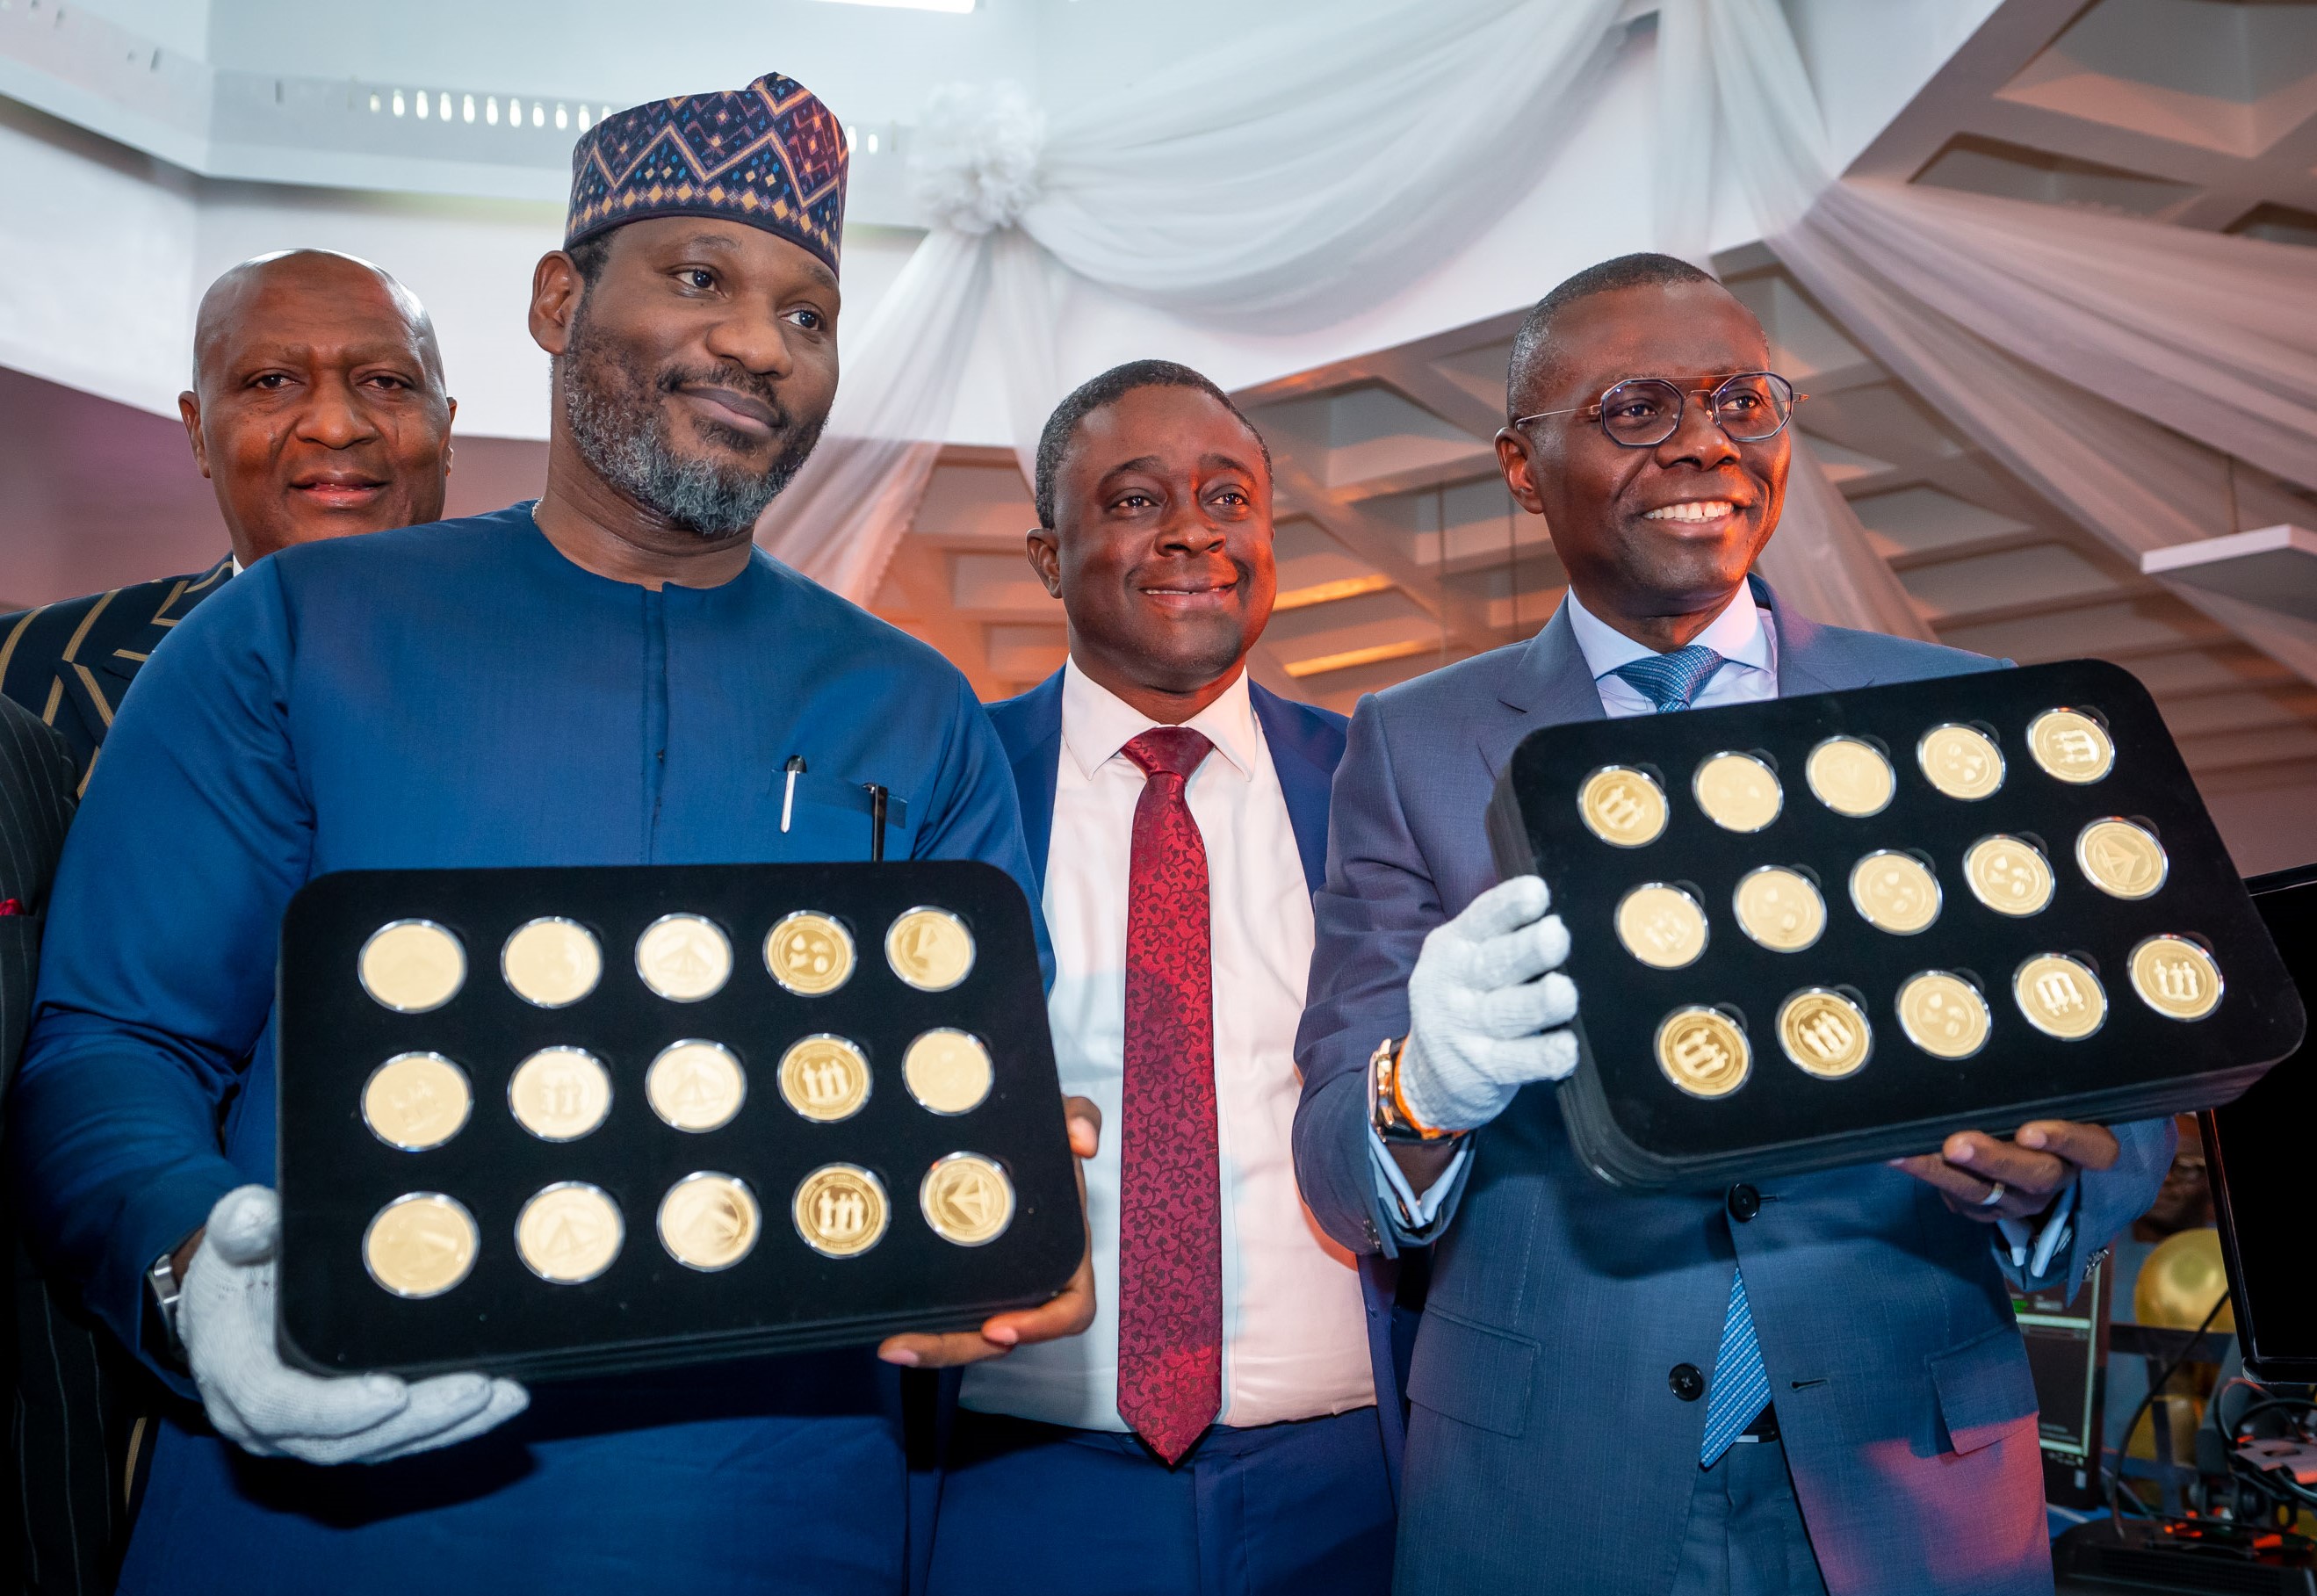 GOV. SANWO-OLU ATTENDS THE COMMISSIONING CEREMONY AND OFFICIAL LAUNCH OF LAGOS COMMODITIES AND FUTURE EXCHANGE AT THE UAC BUILDING